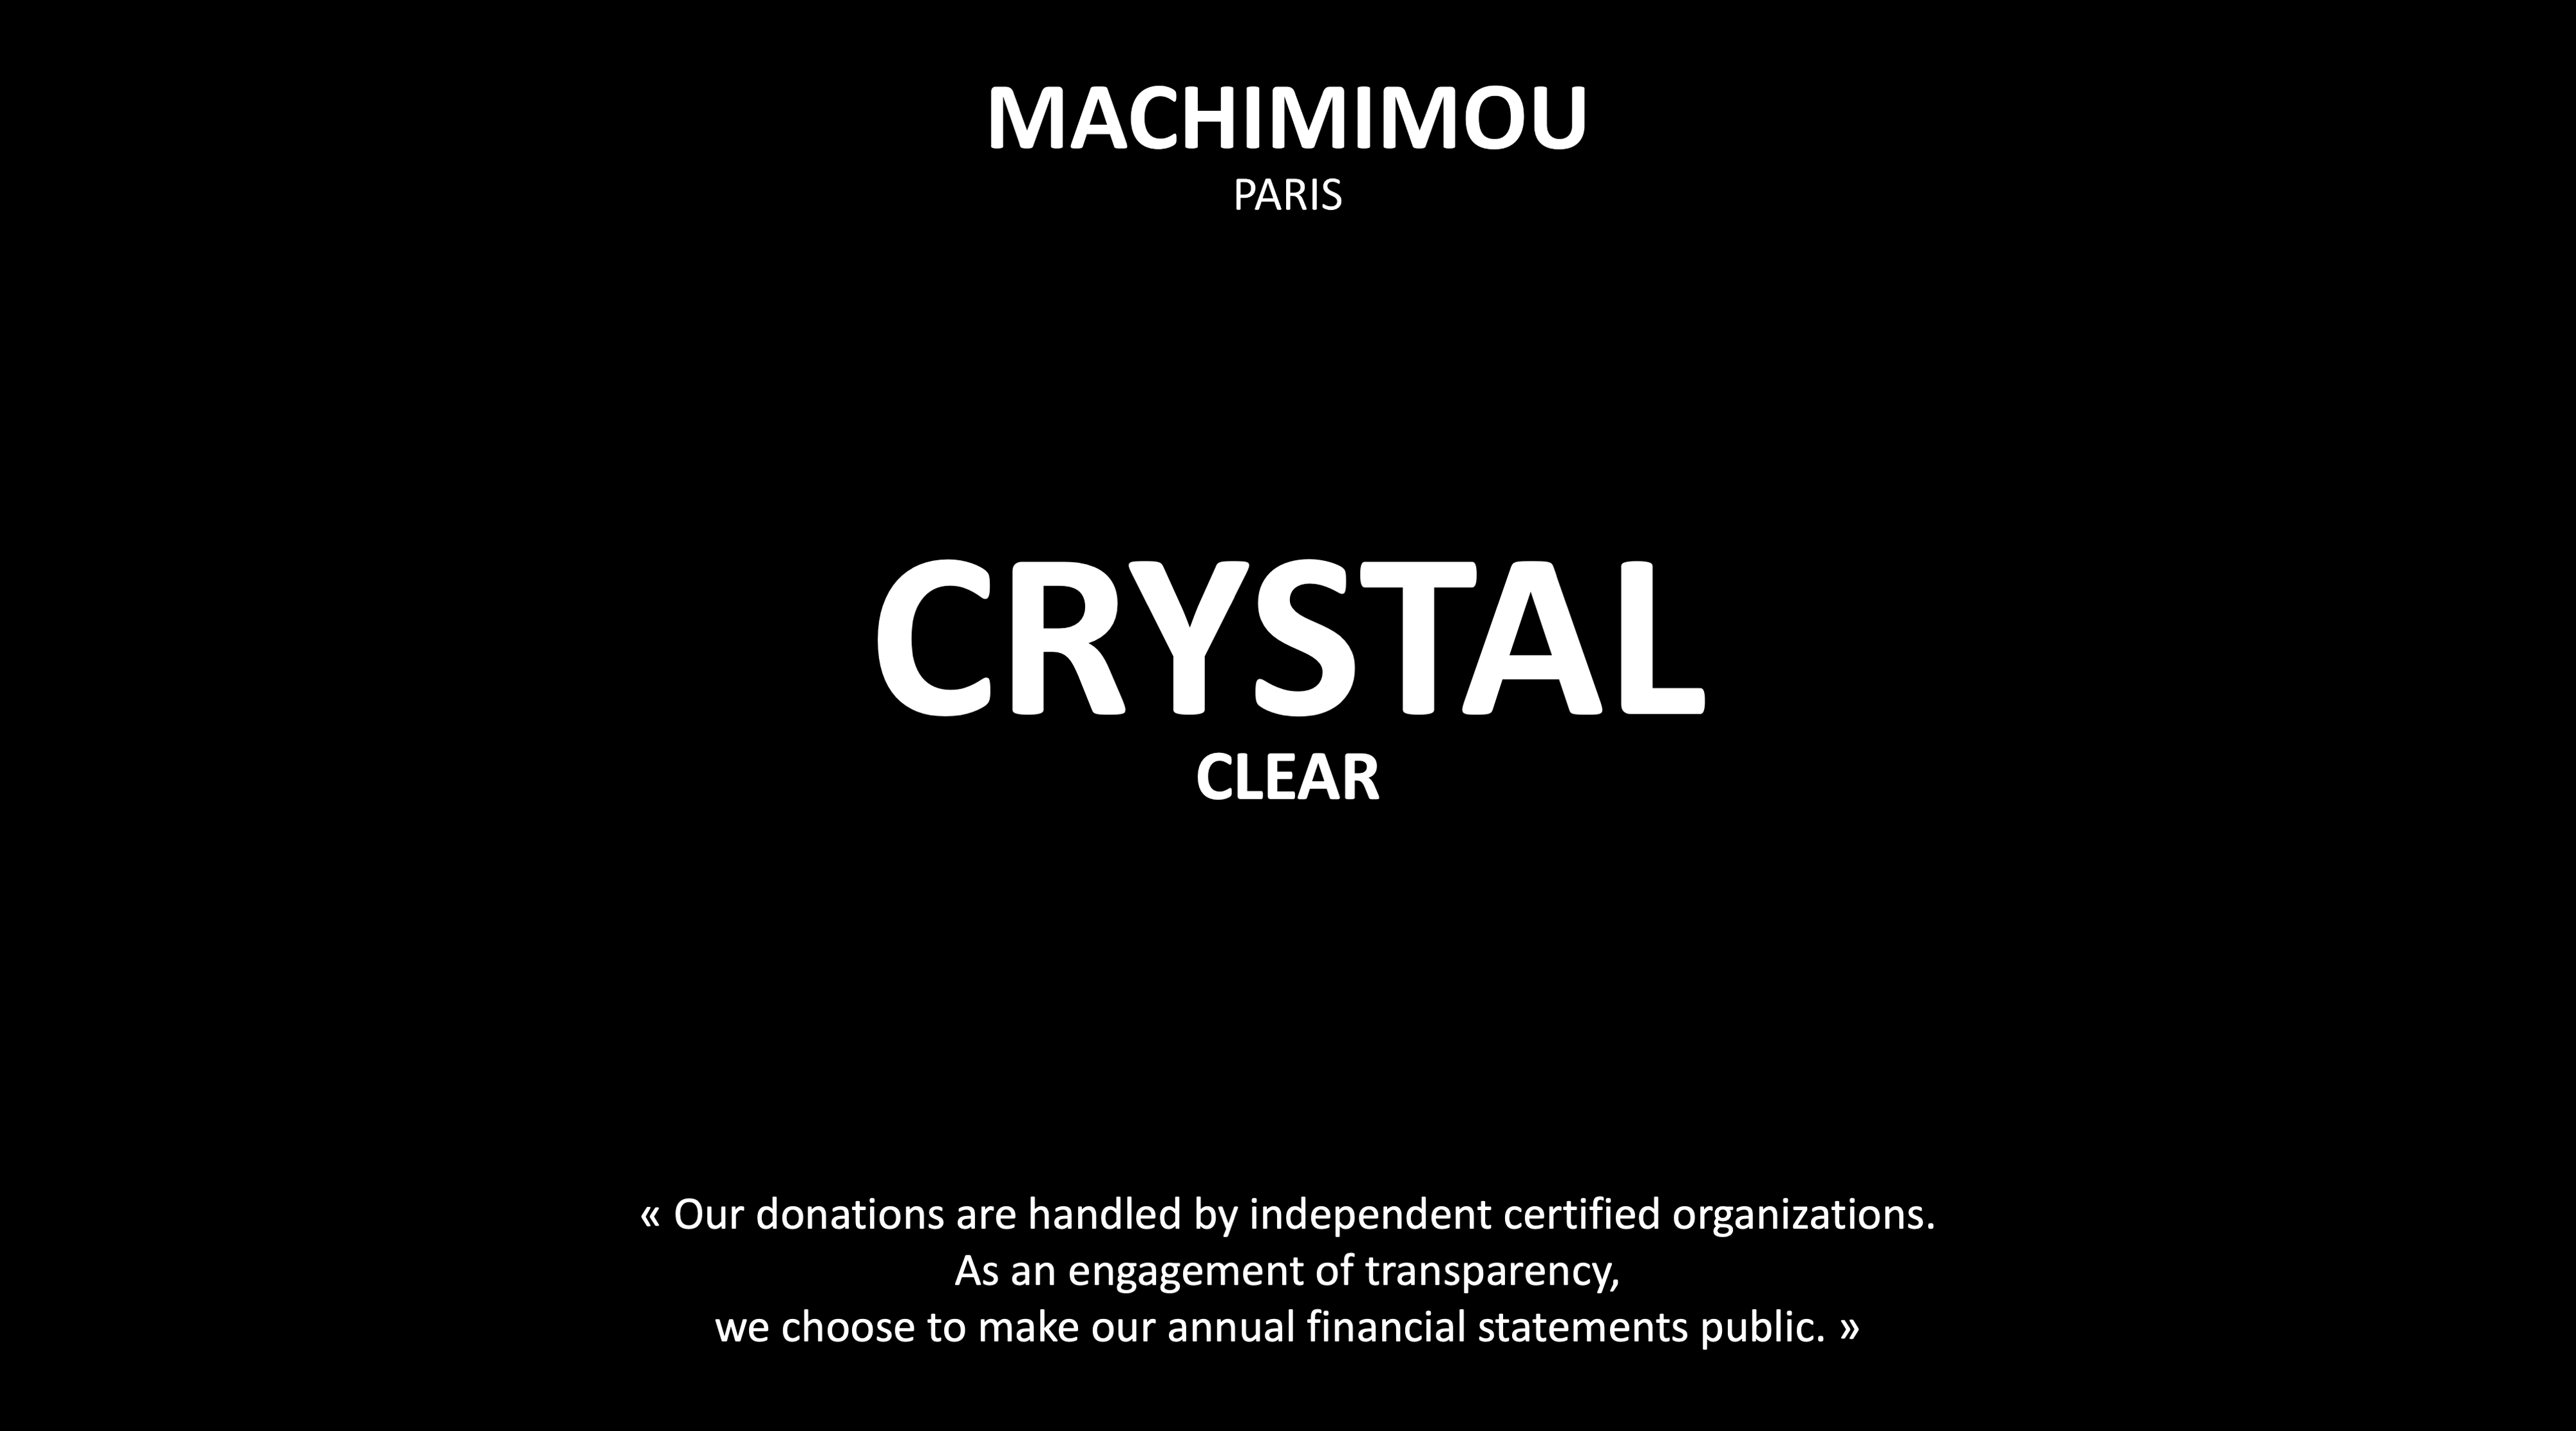 MACHIMIMOU PARIS - Crystal Clear Philanthropic Donations